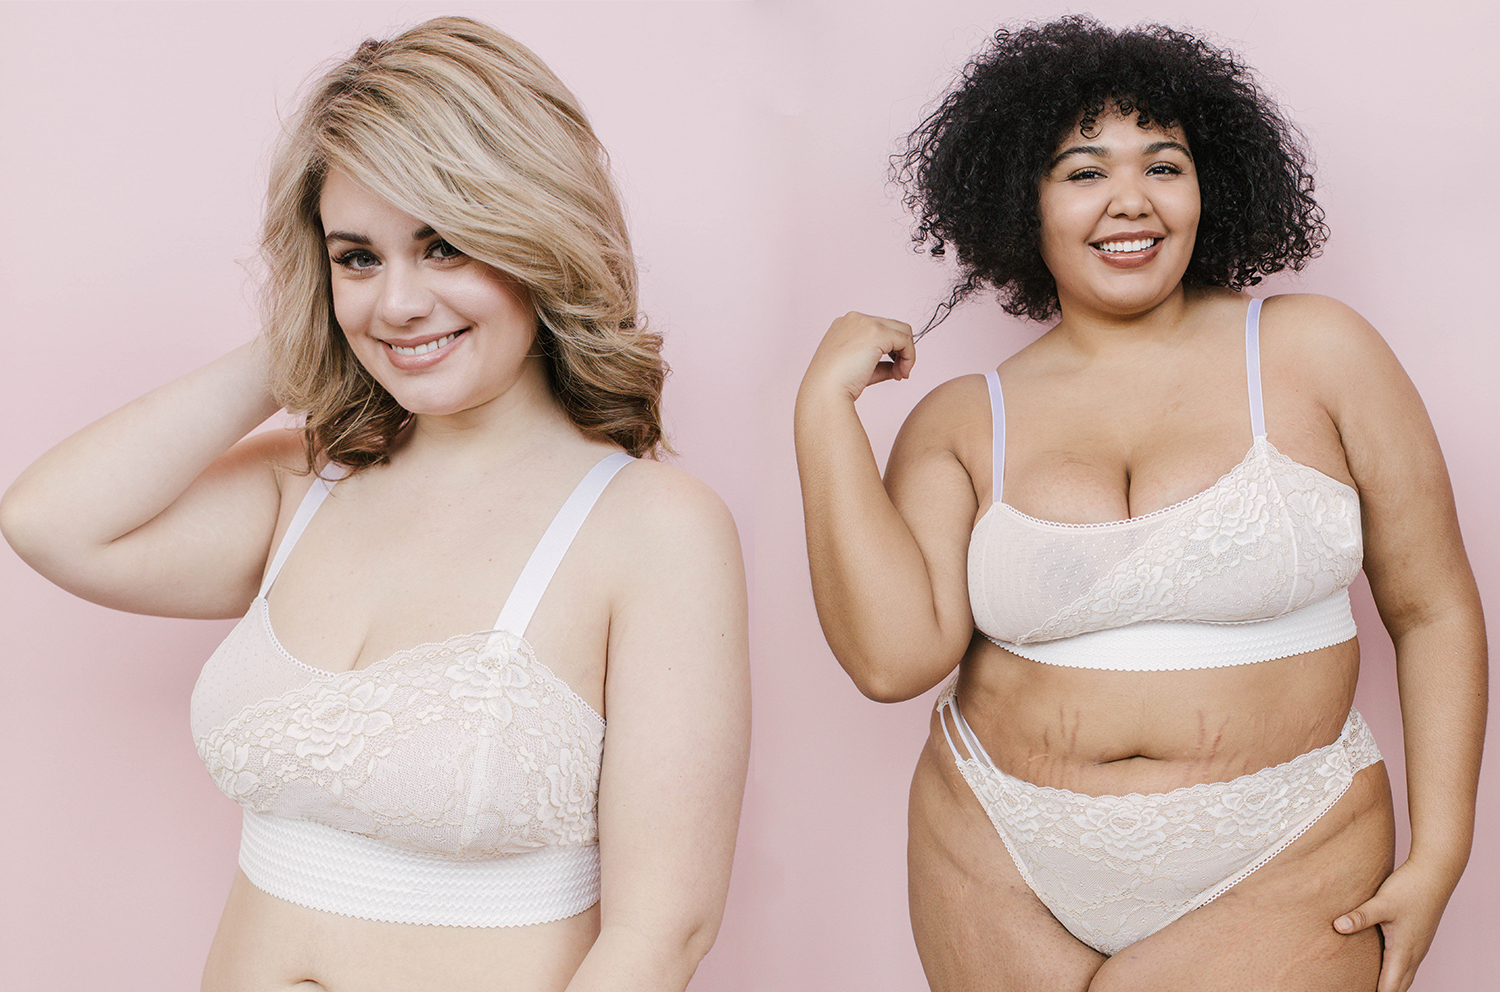 Plus Size Lingerie versus Full Bust Lingerie. What's the difference?